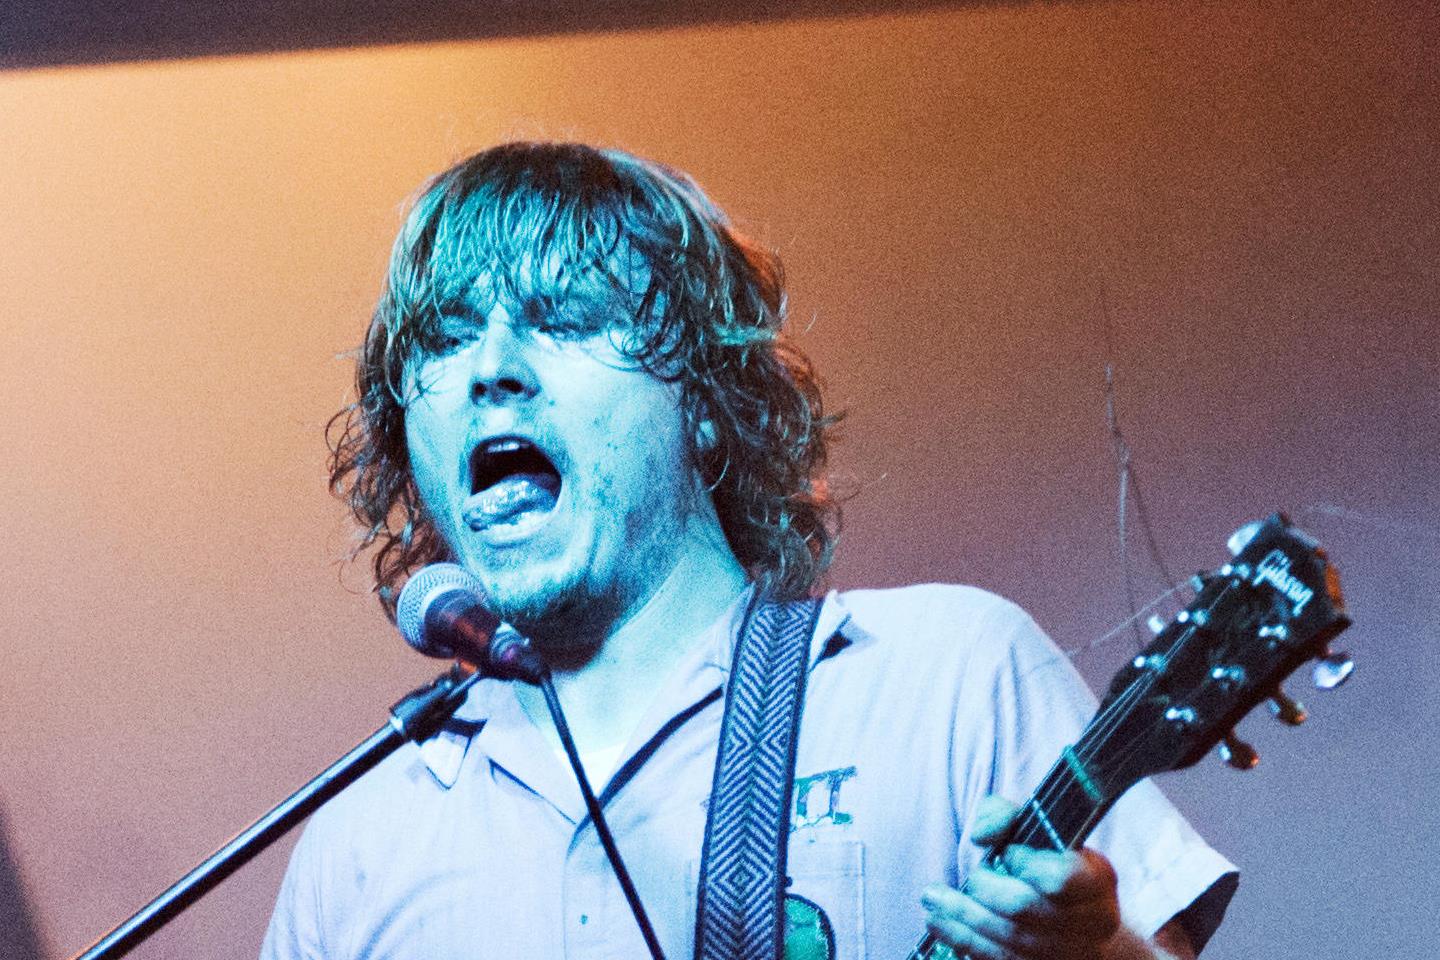 ty segall tour pittsburgh